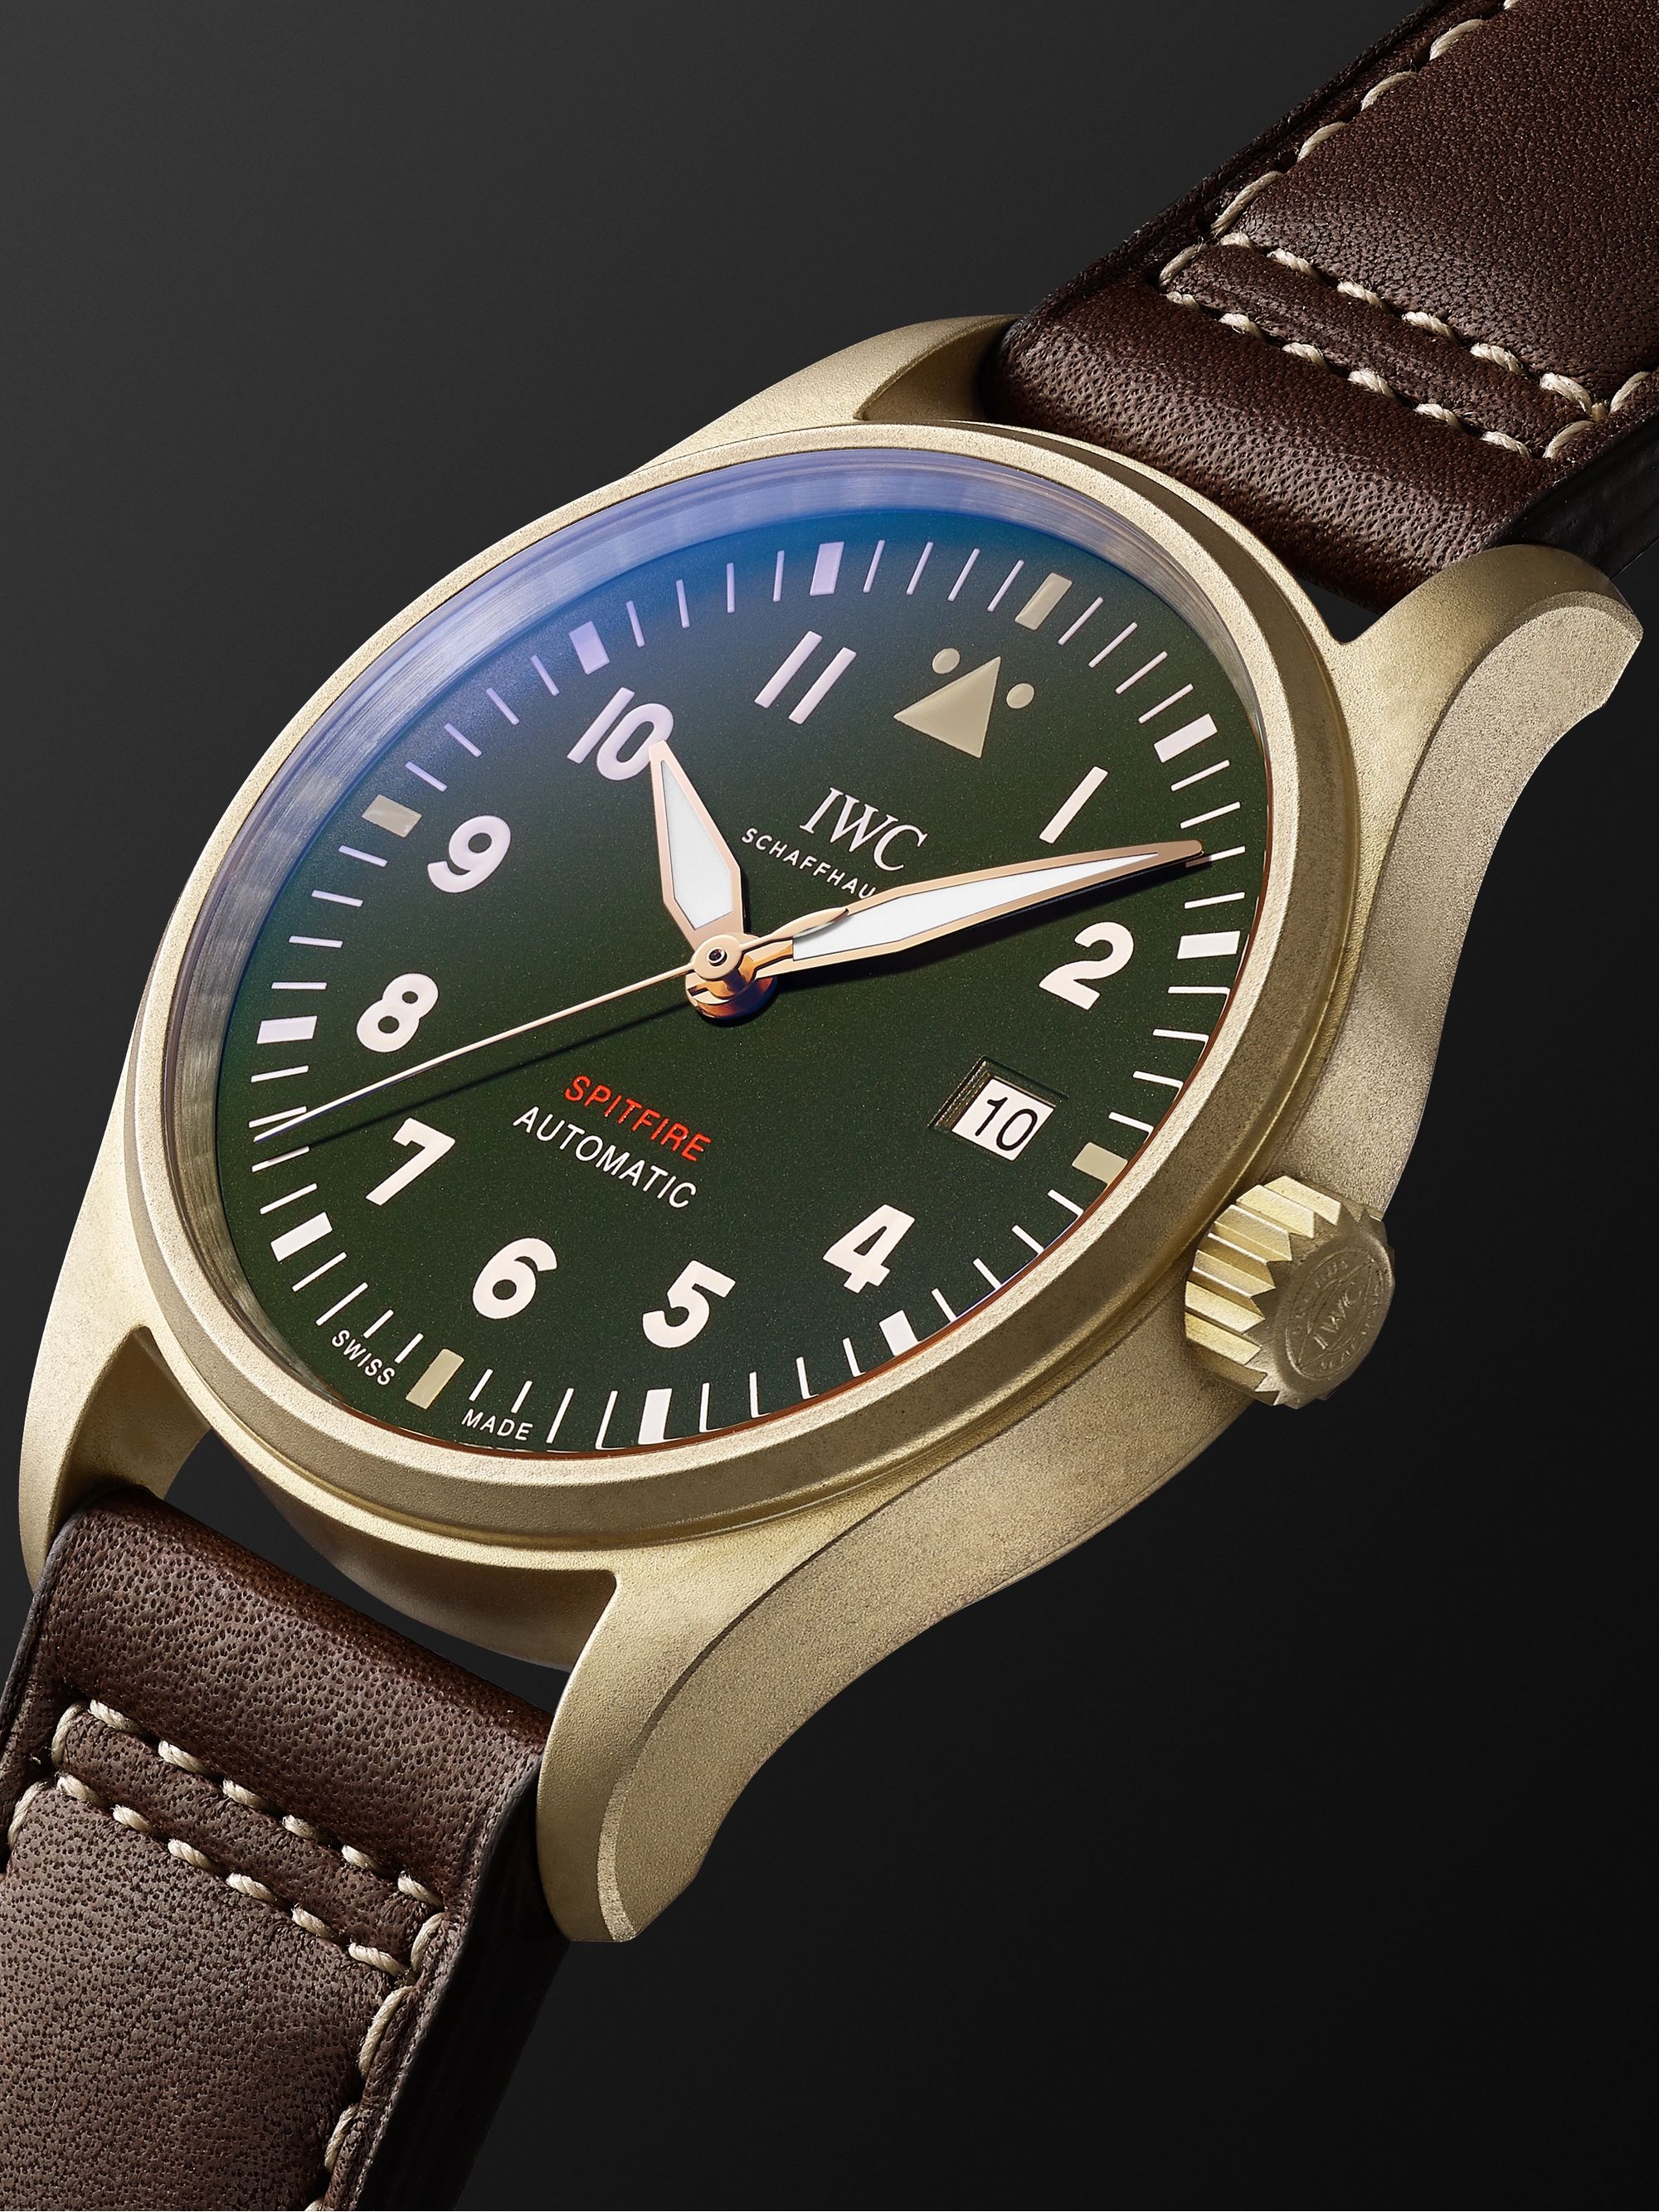 IWC SCHAFFHAUSEN Pilot's Spitfire Automatic 39mm Bronze and Leather Watch, Ref. No. IW326802